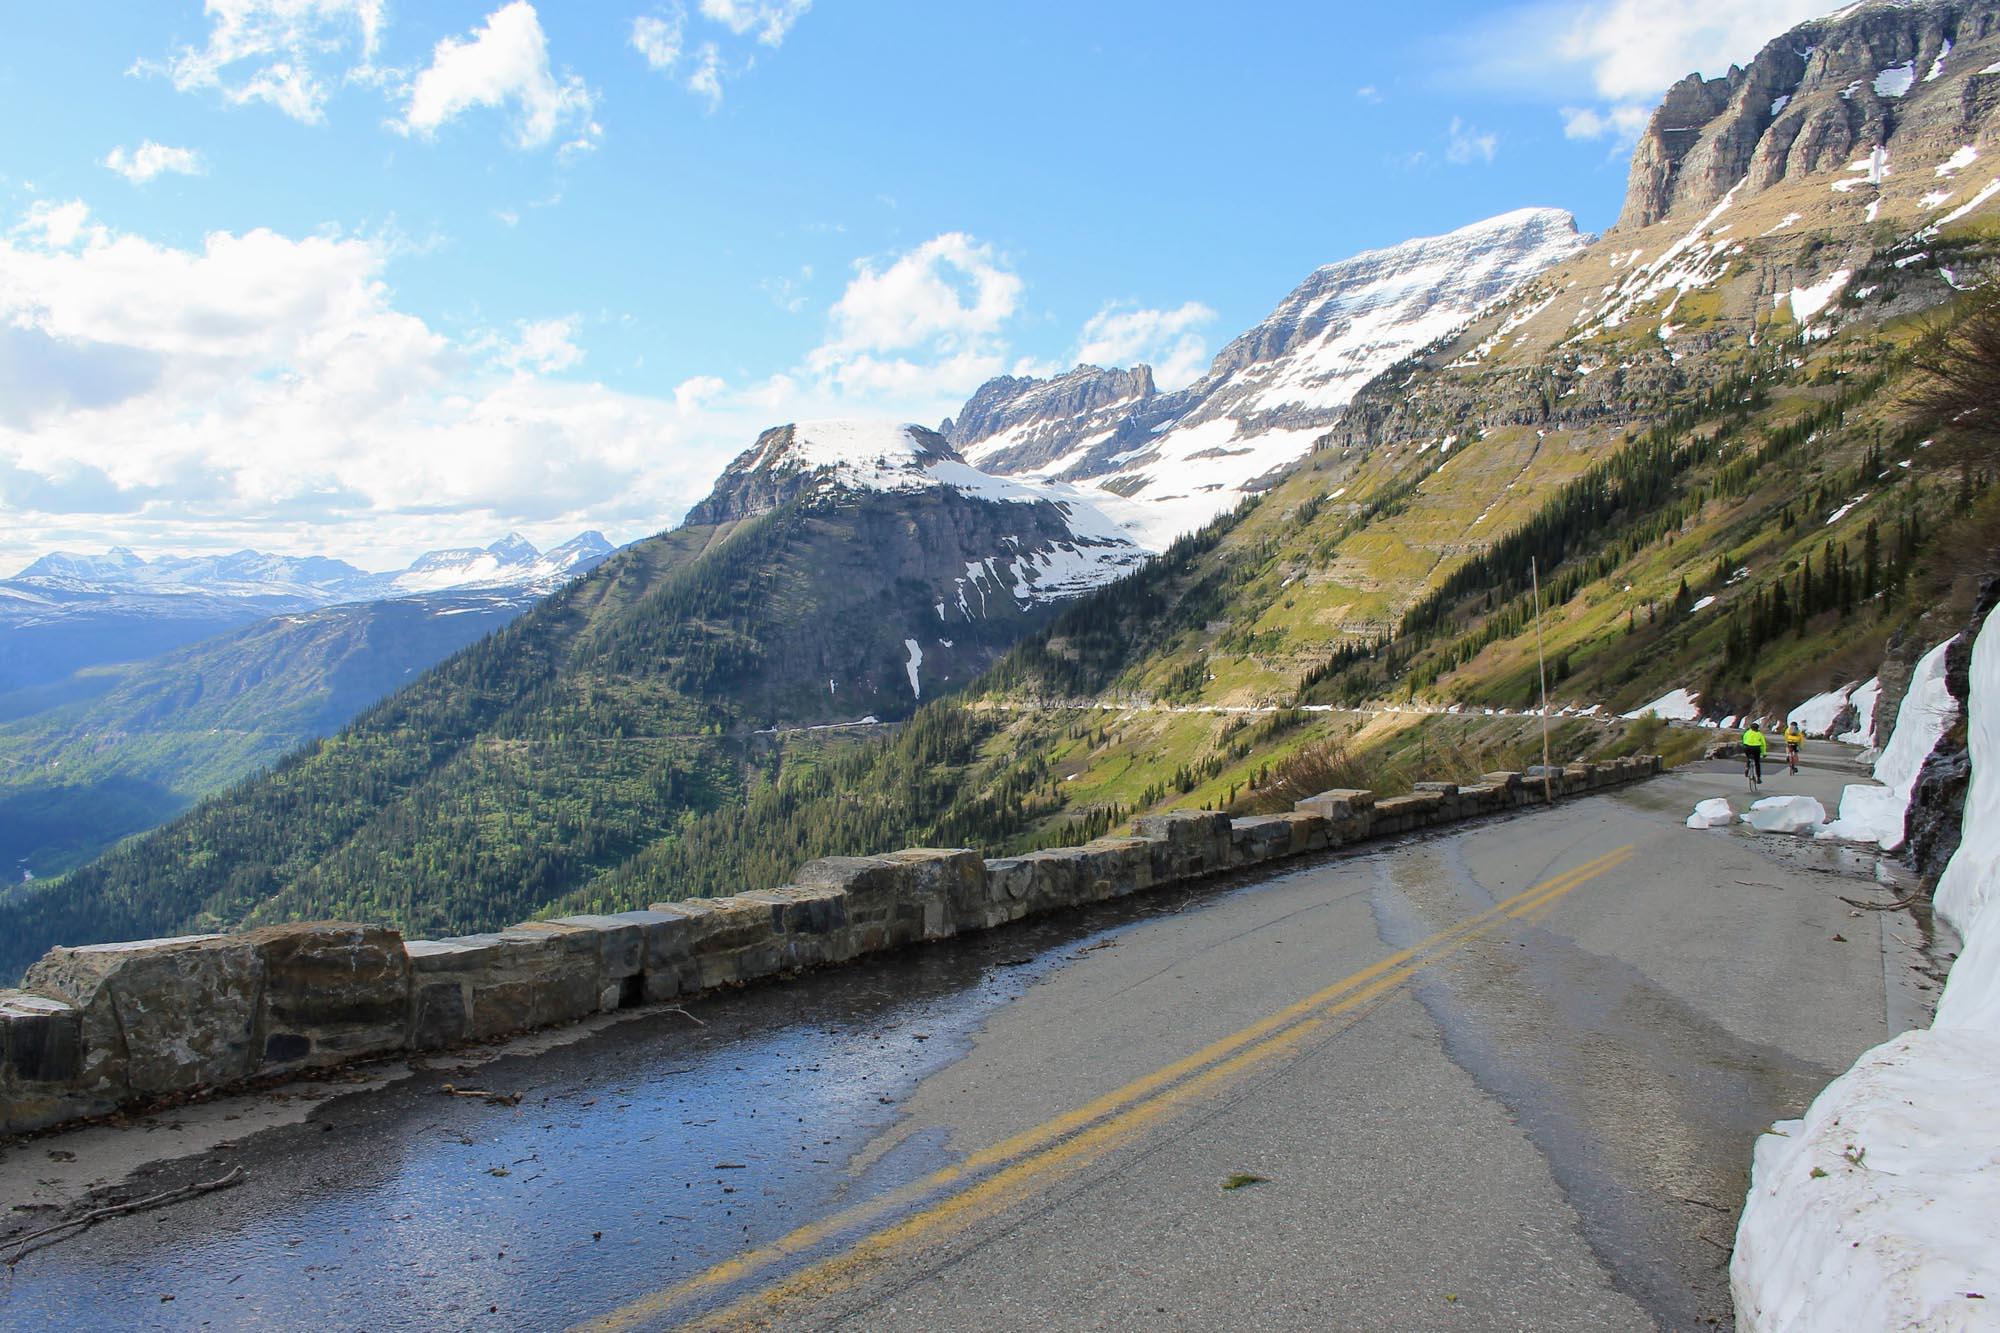 After working to reach Logan Pass, miles of downhill take you back toward your starting point